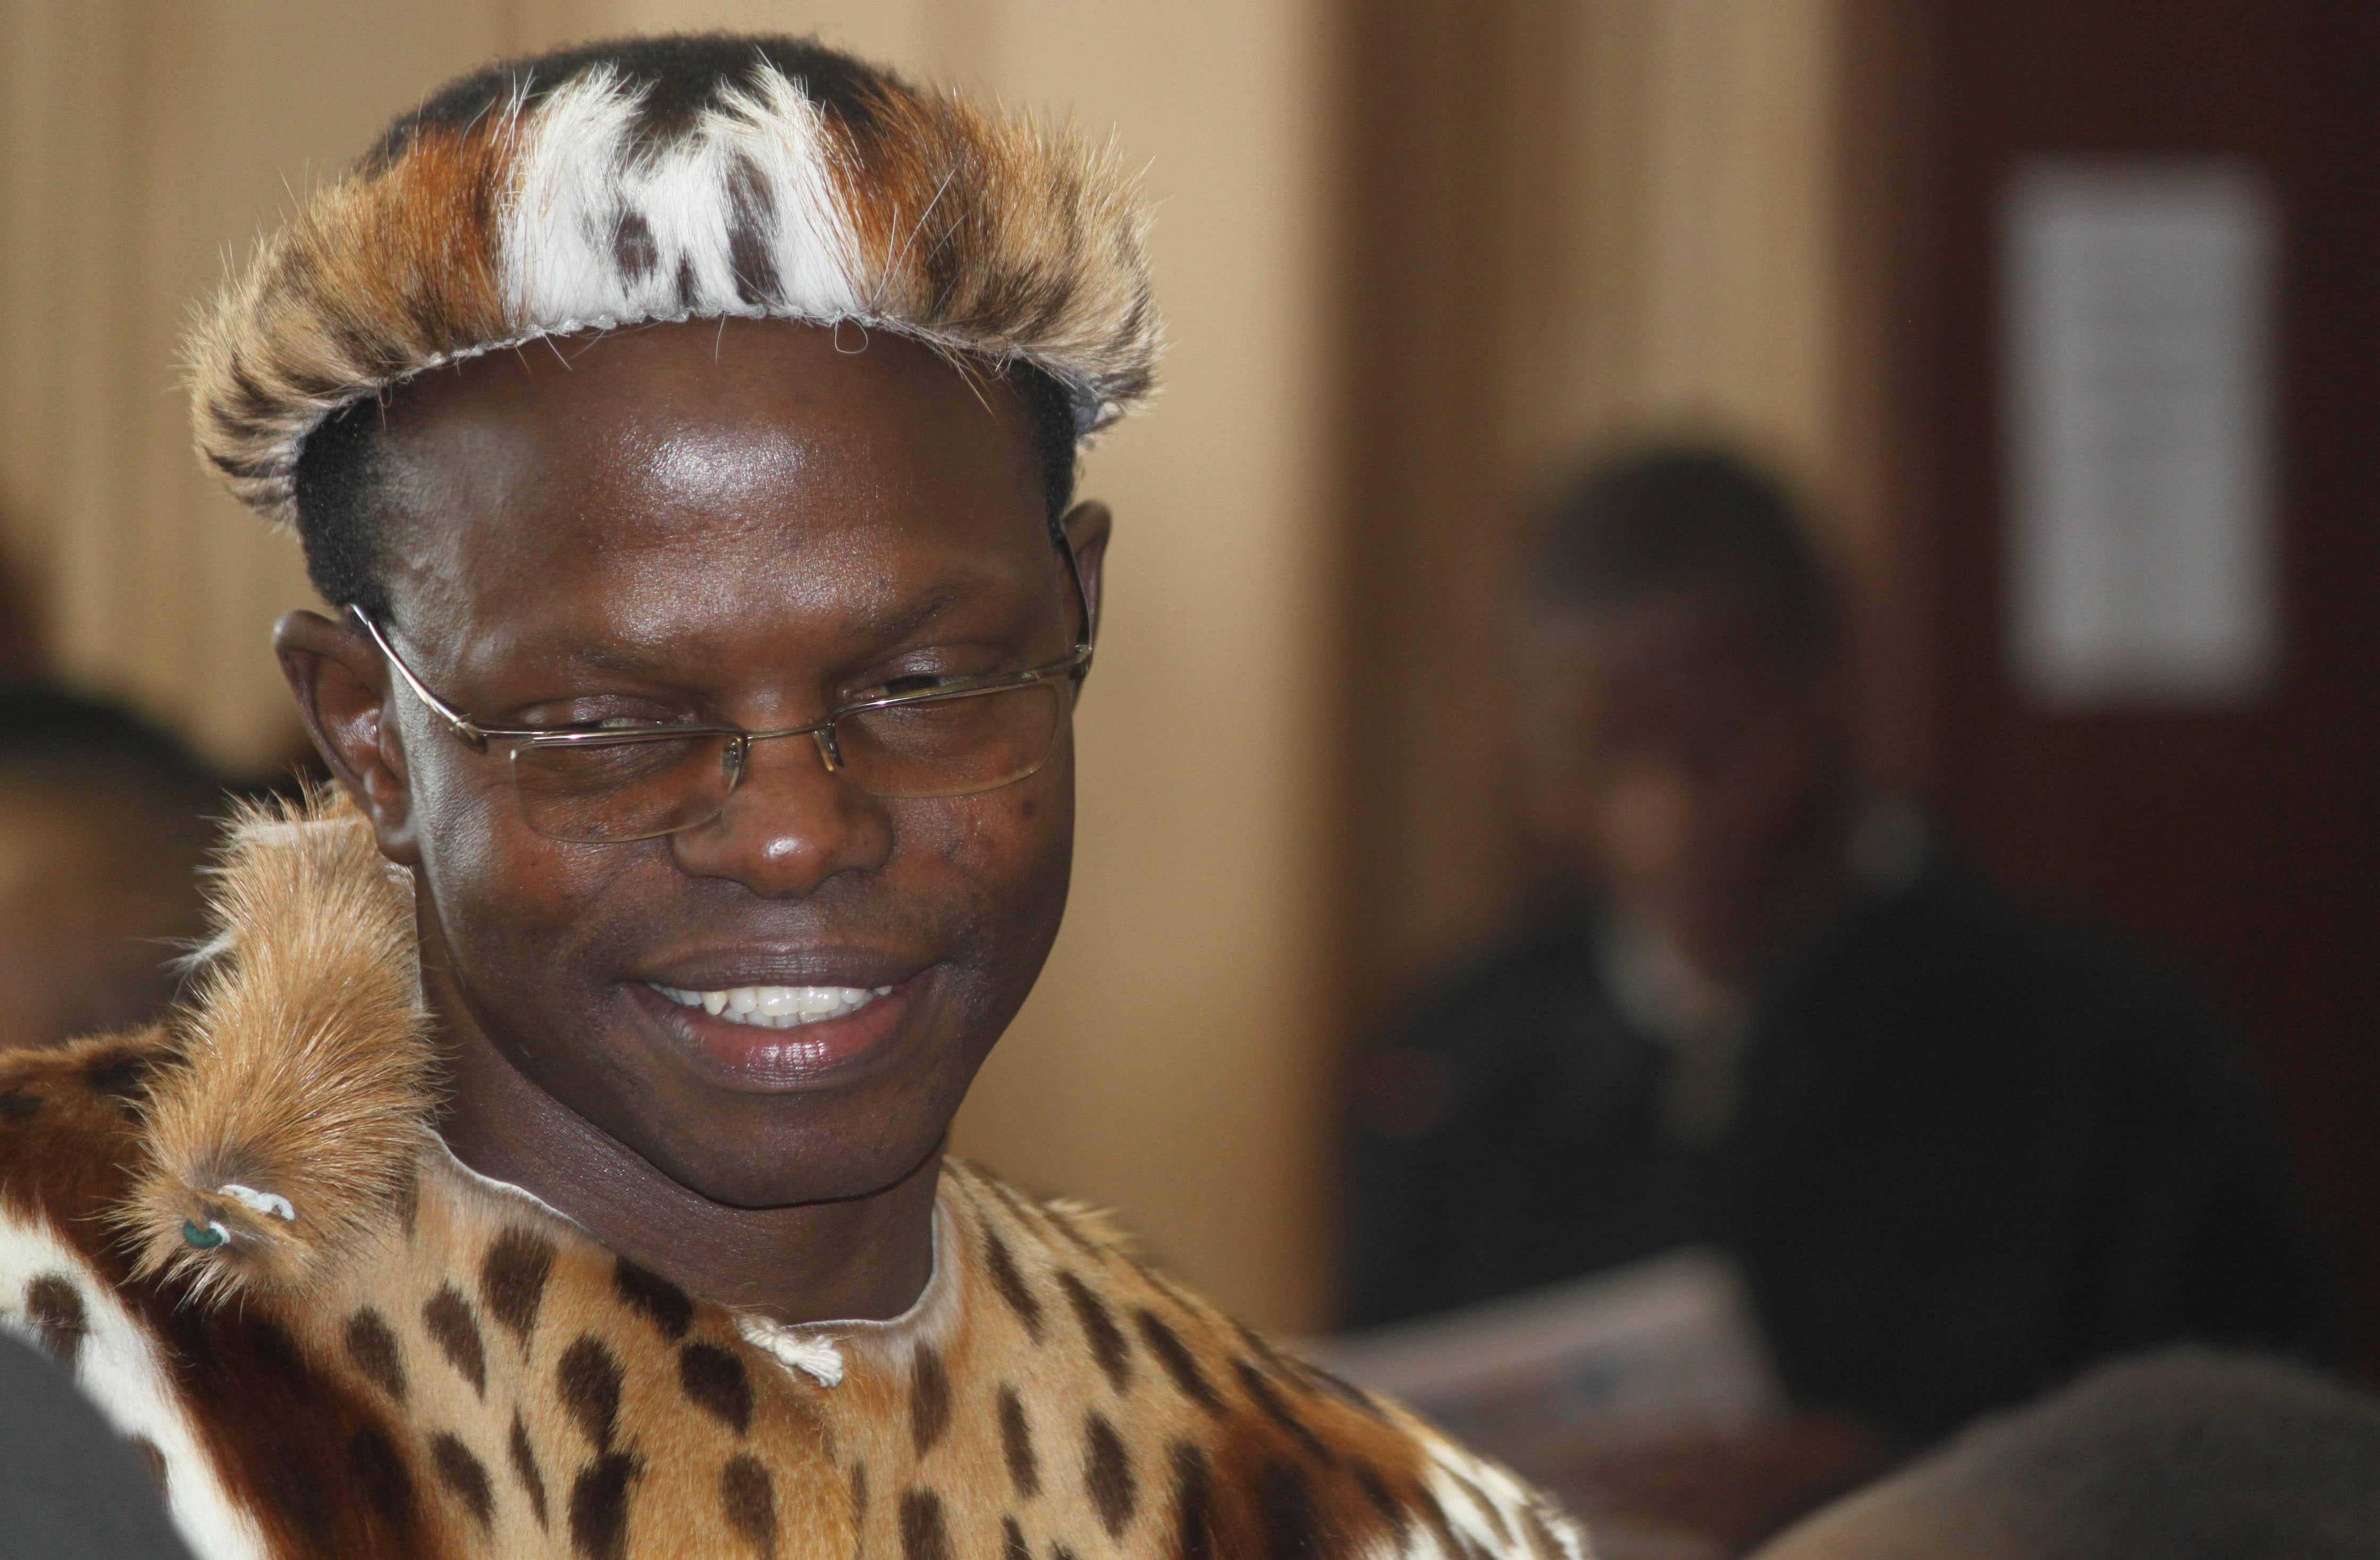 In this photo taken on 4 June 2014, lawyer Thulani Maseko appears in court in the traditional animal skin garb of a Zulu warrior, in Mbabane, Swaziland, AP Photo/Nkosingiphile Myeni-The Nation Magazine